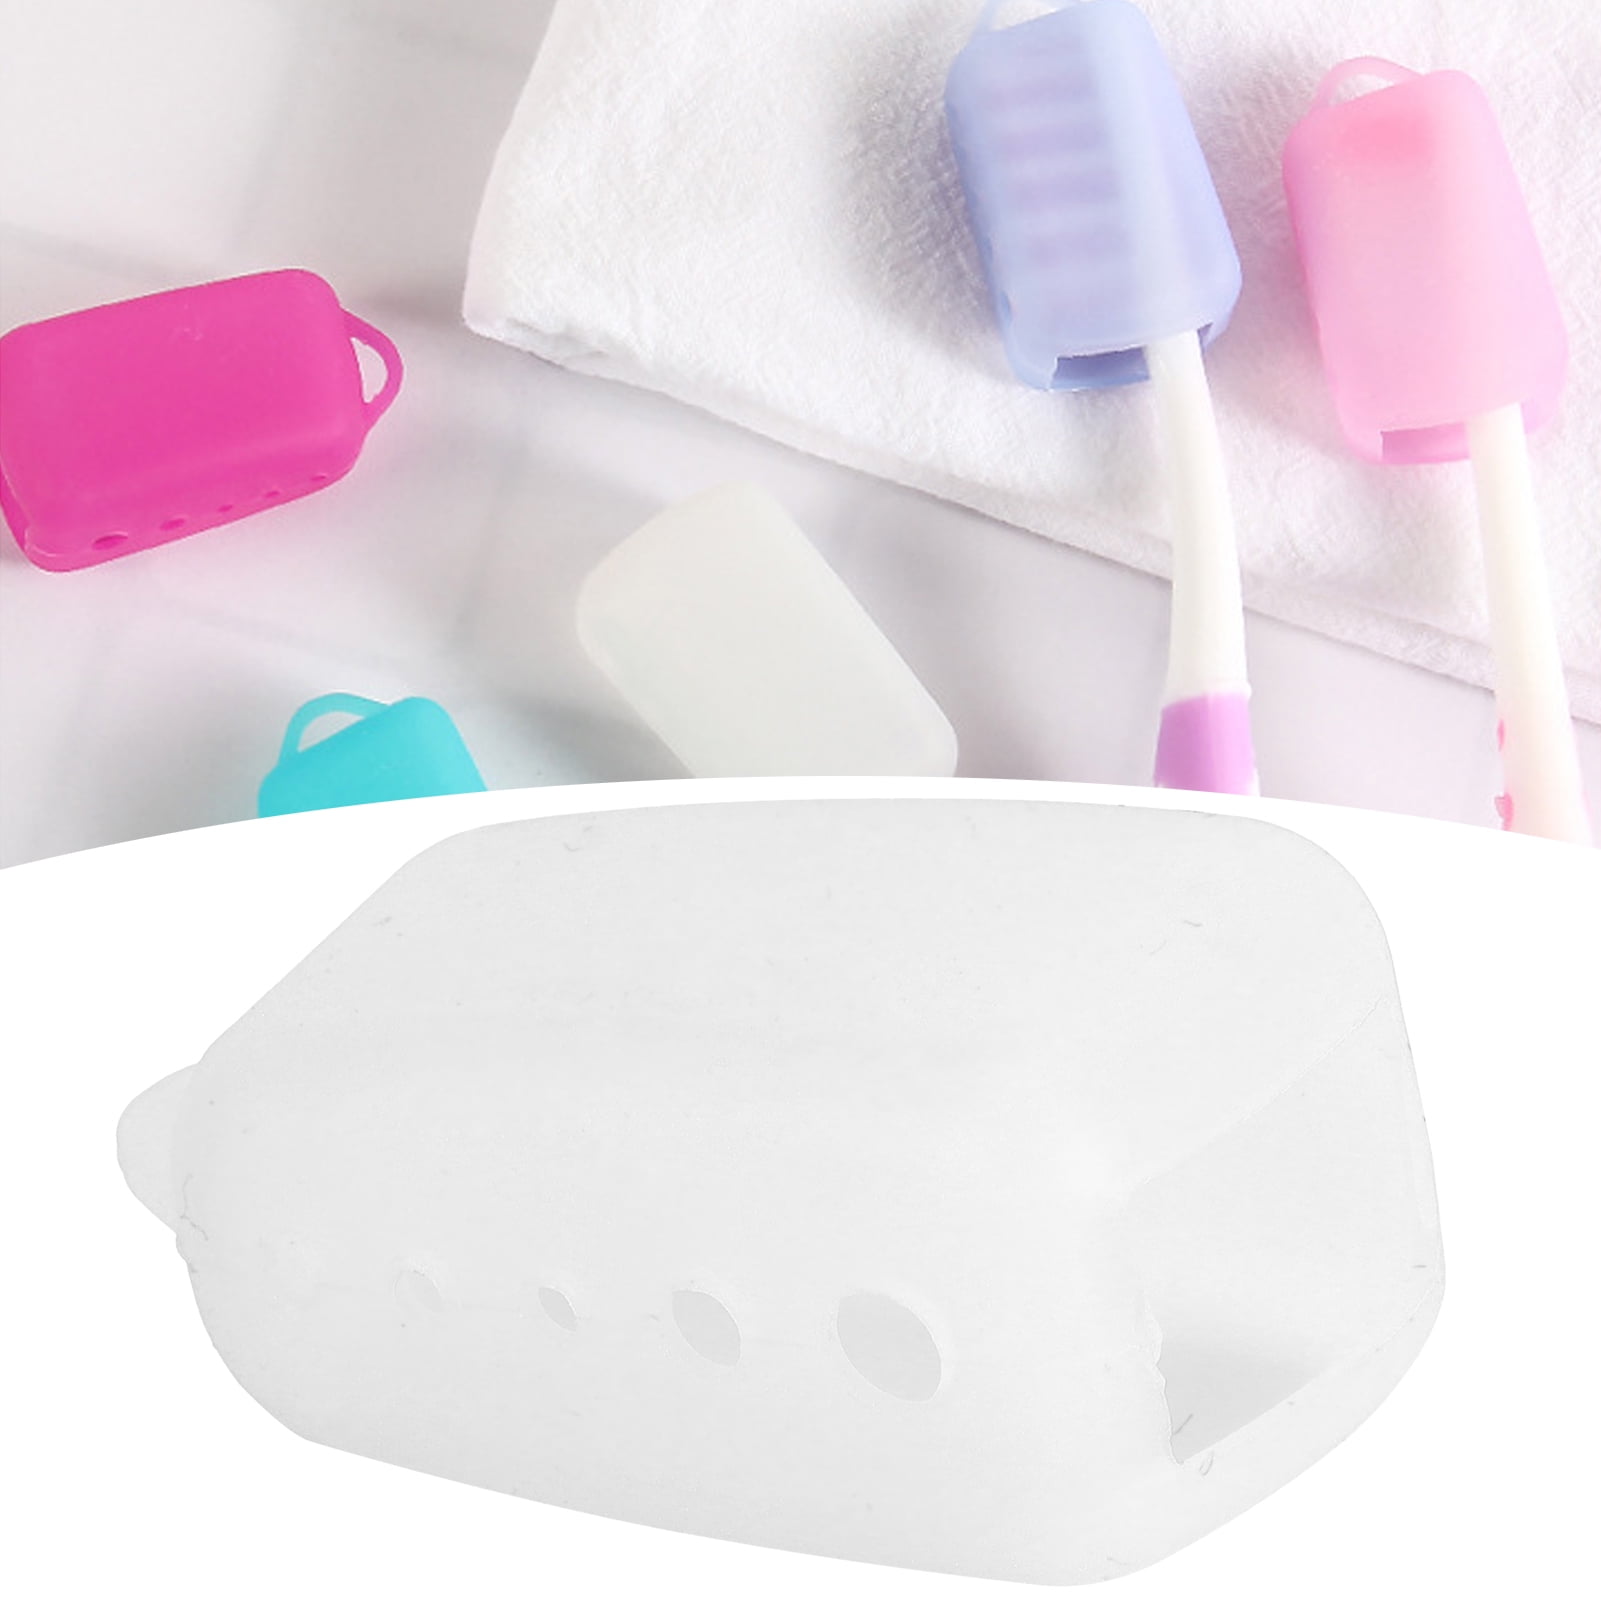 Details about   Quality Silicone Toothbrush Head Cover Electric Toothbrush Protective Cap Cover 